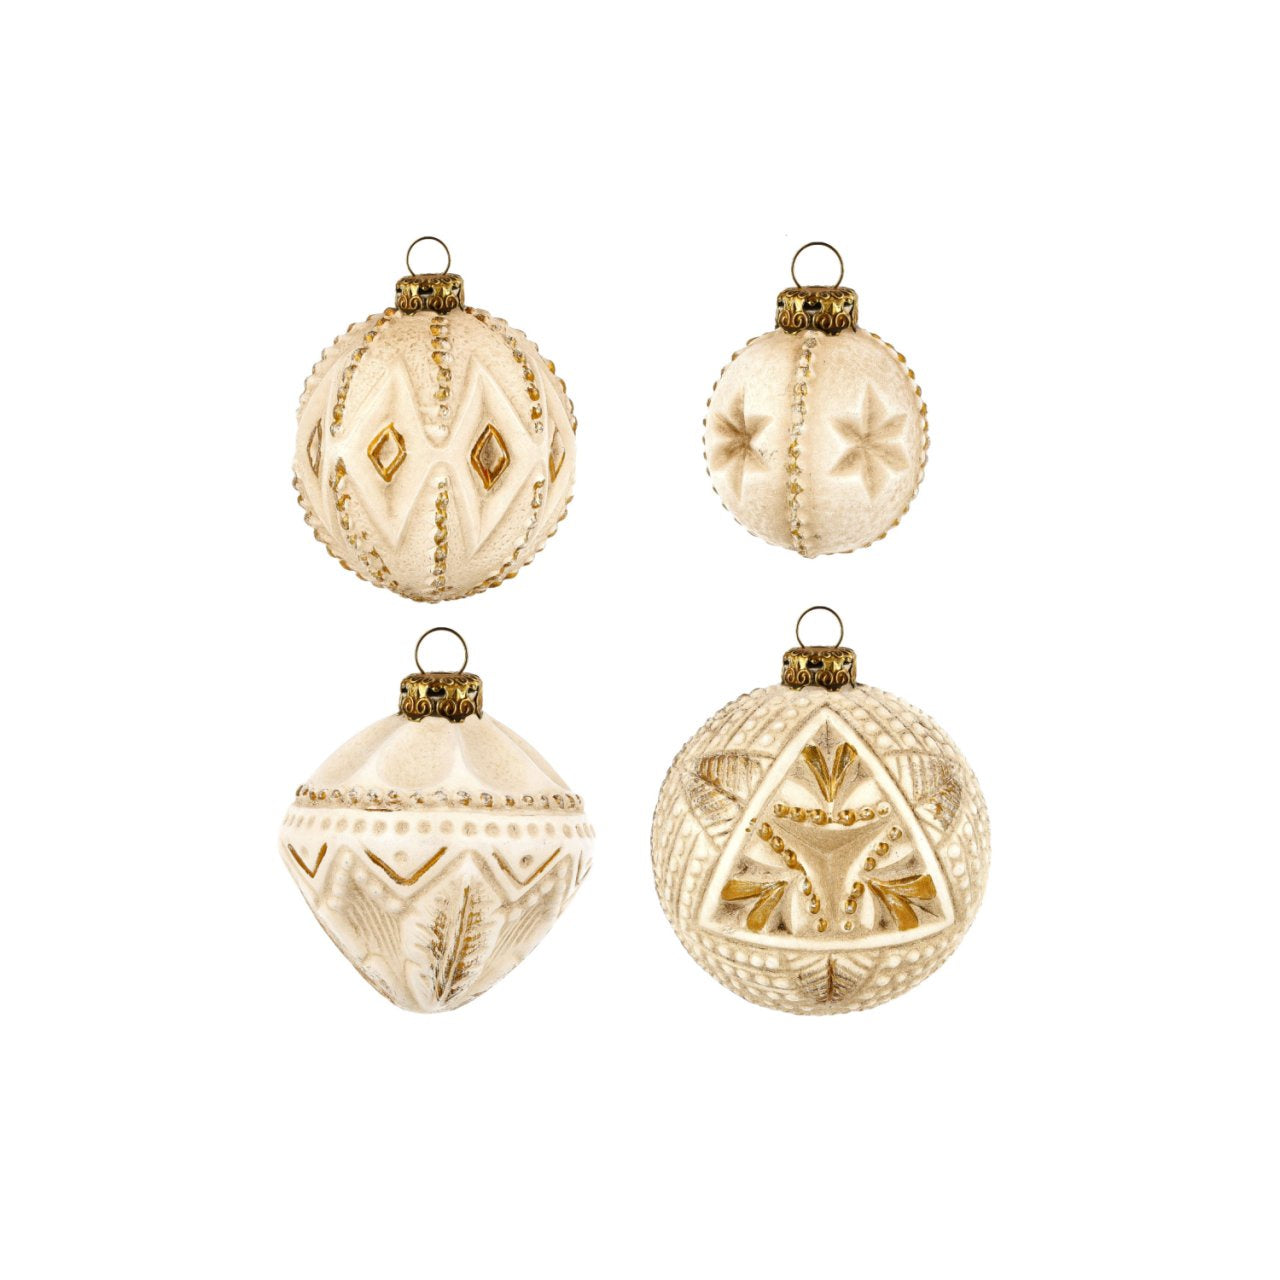 Antique White Ornaments with gold accents  by Marolin Manufaktur